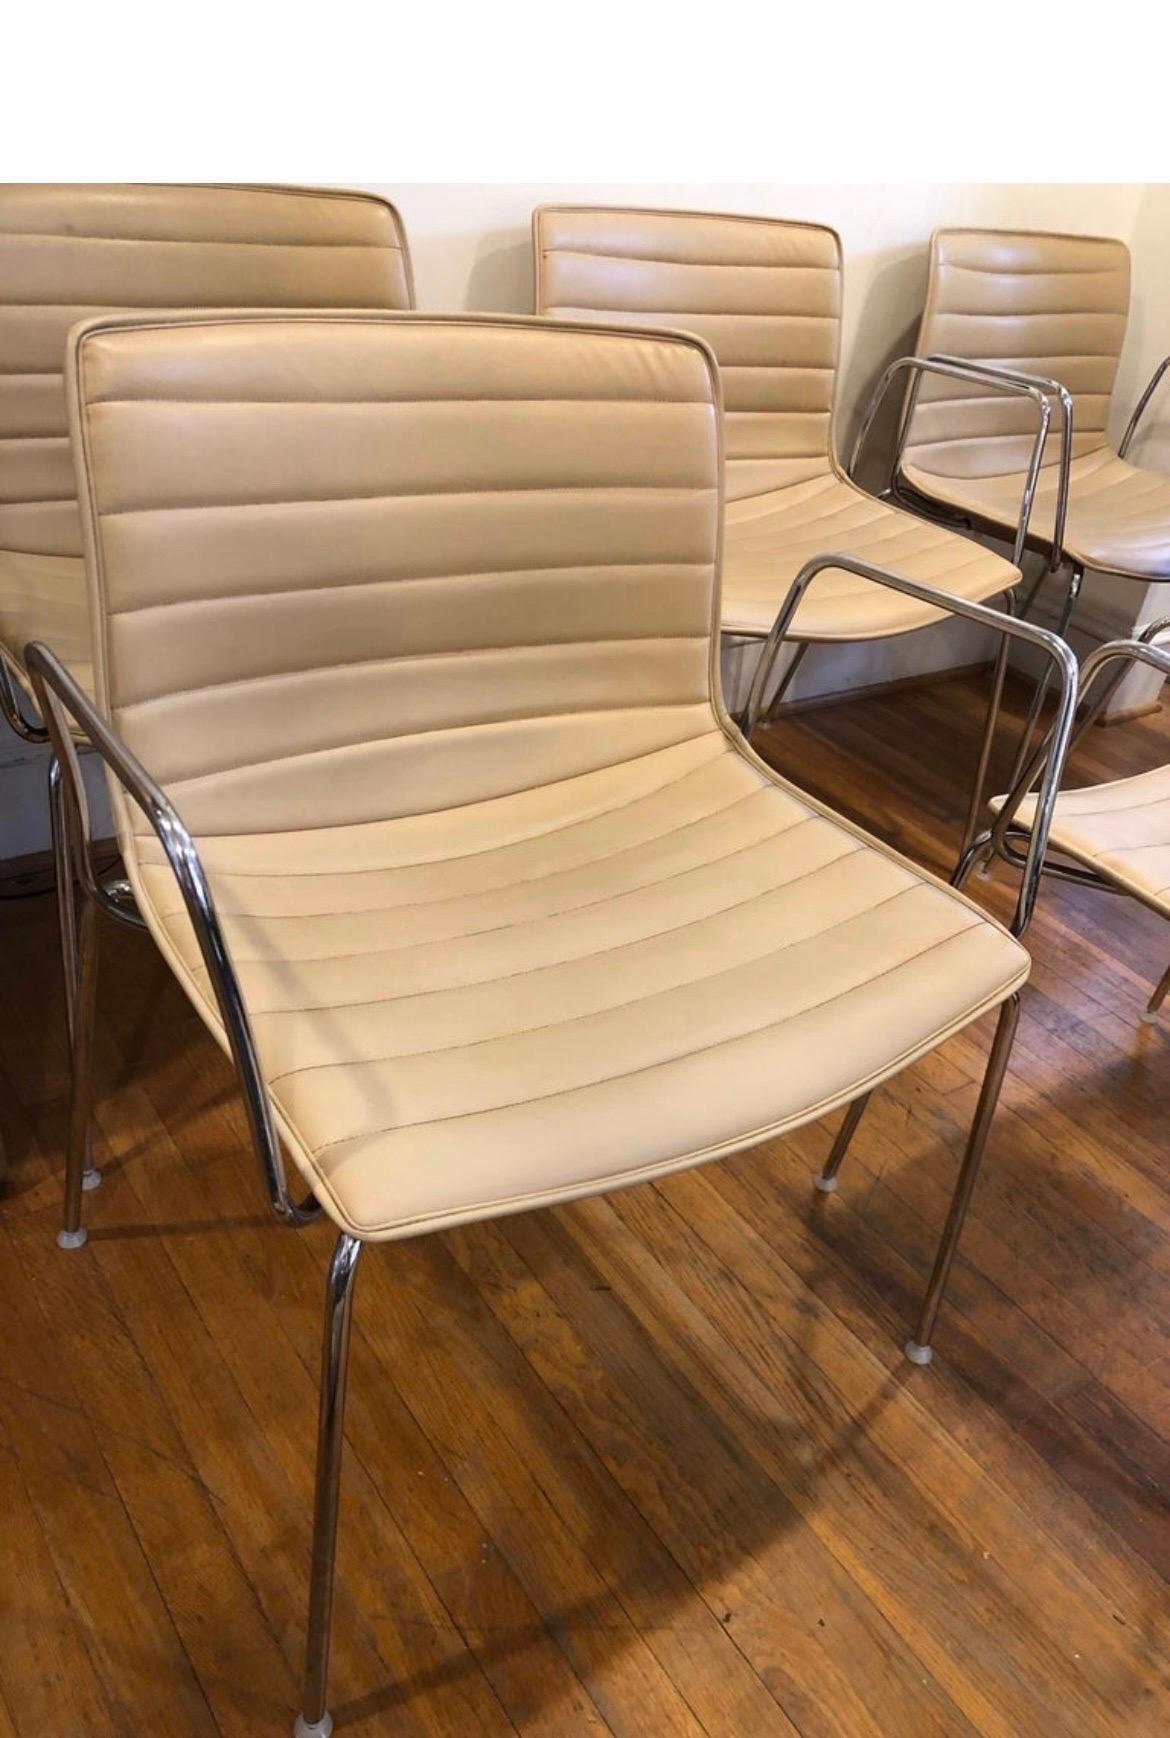 Contemporary Arper Catifa 53 Chairs - Tan Leather with Steel Base and Arms - 10 Available For Sale